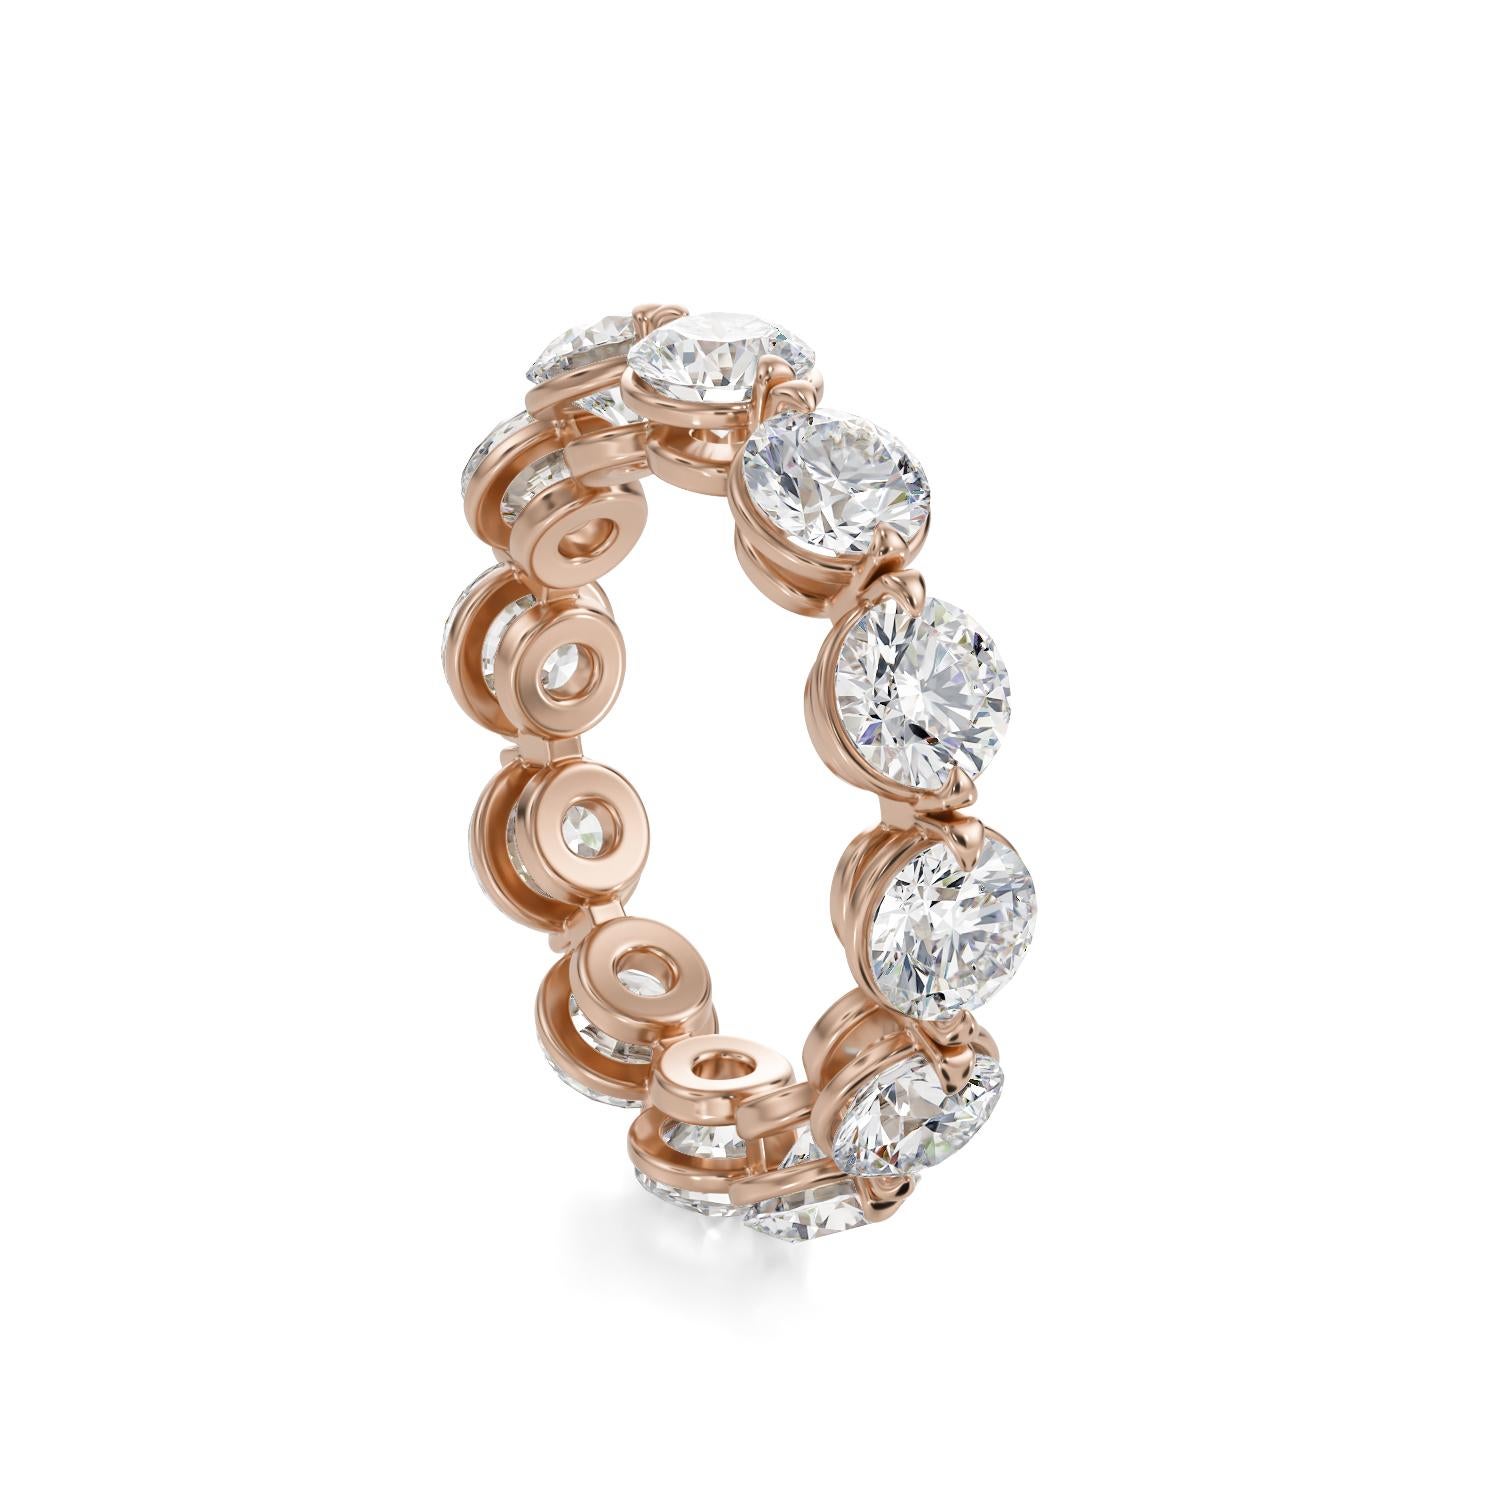 Diamond Eternity Band set in Rose Gold. 12 Round Brilliant diamonds are E-F VS1-SI1. Carat weight: 4ct. Total ring weight 5.2grams. Ring size: 5. Can be sized upon request. This ring is customizable, price may vary depending on modifications such